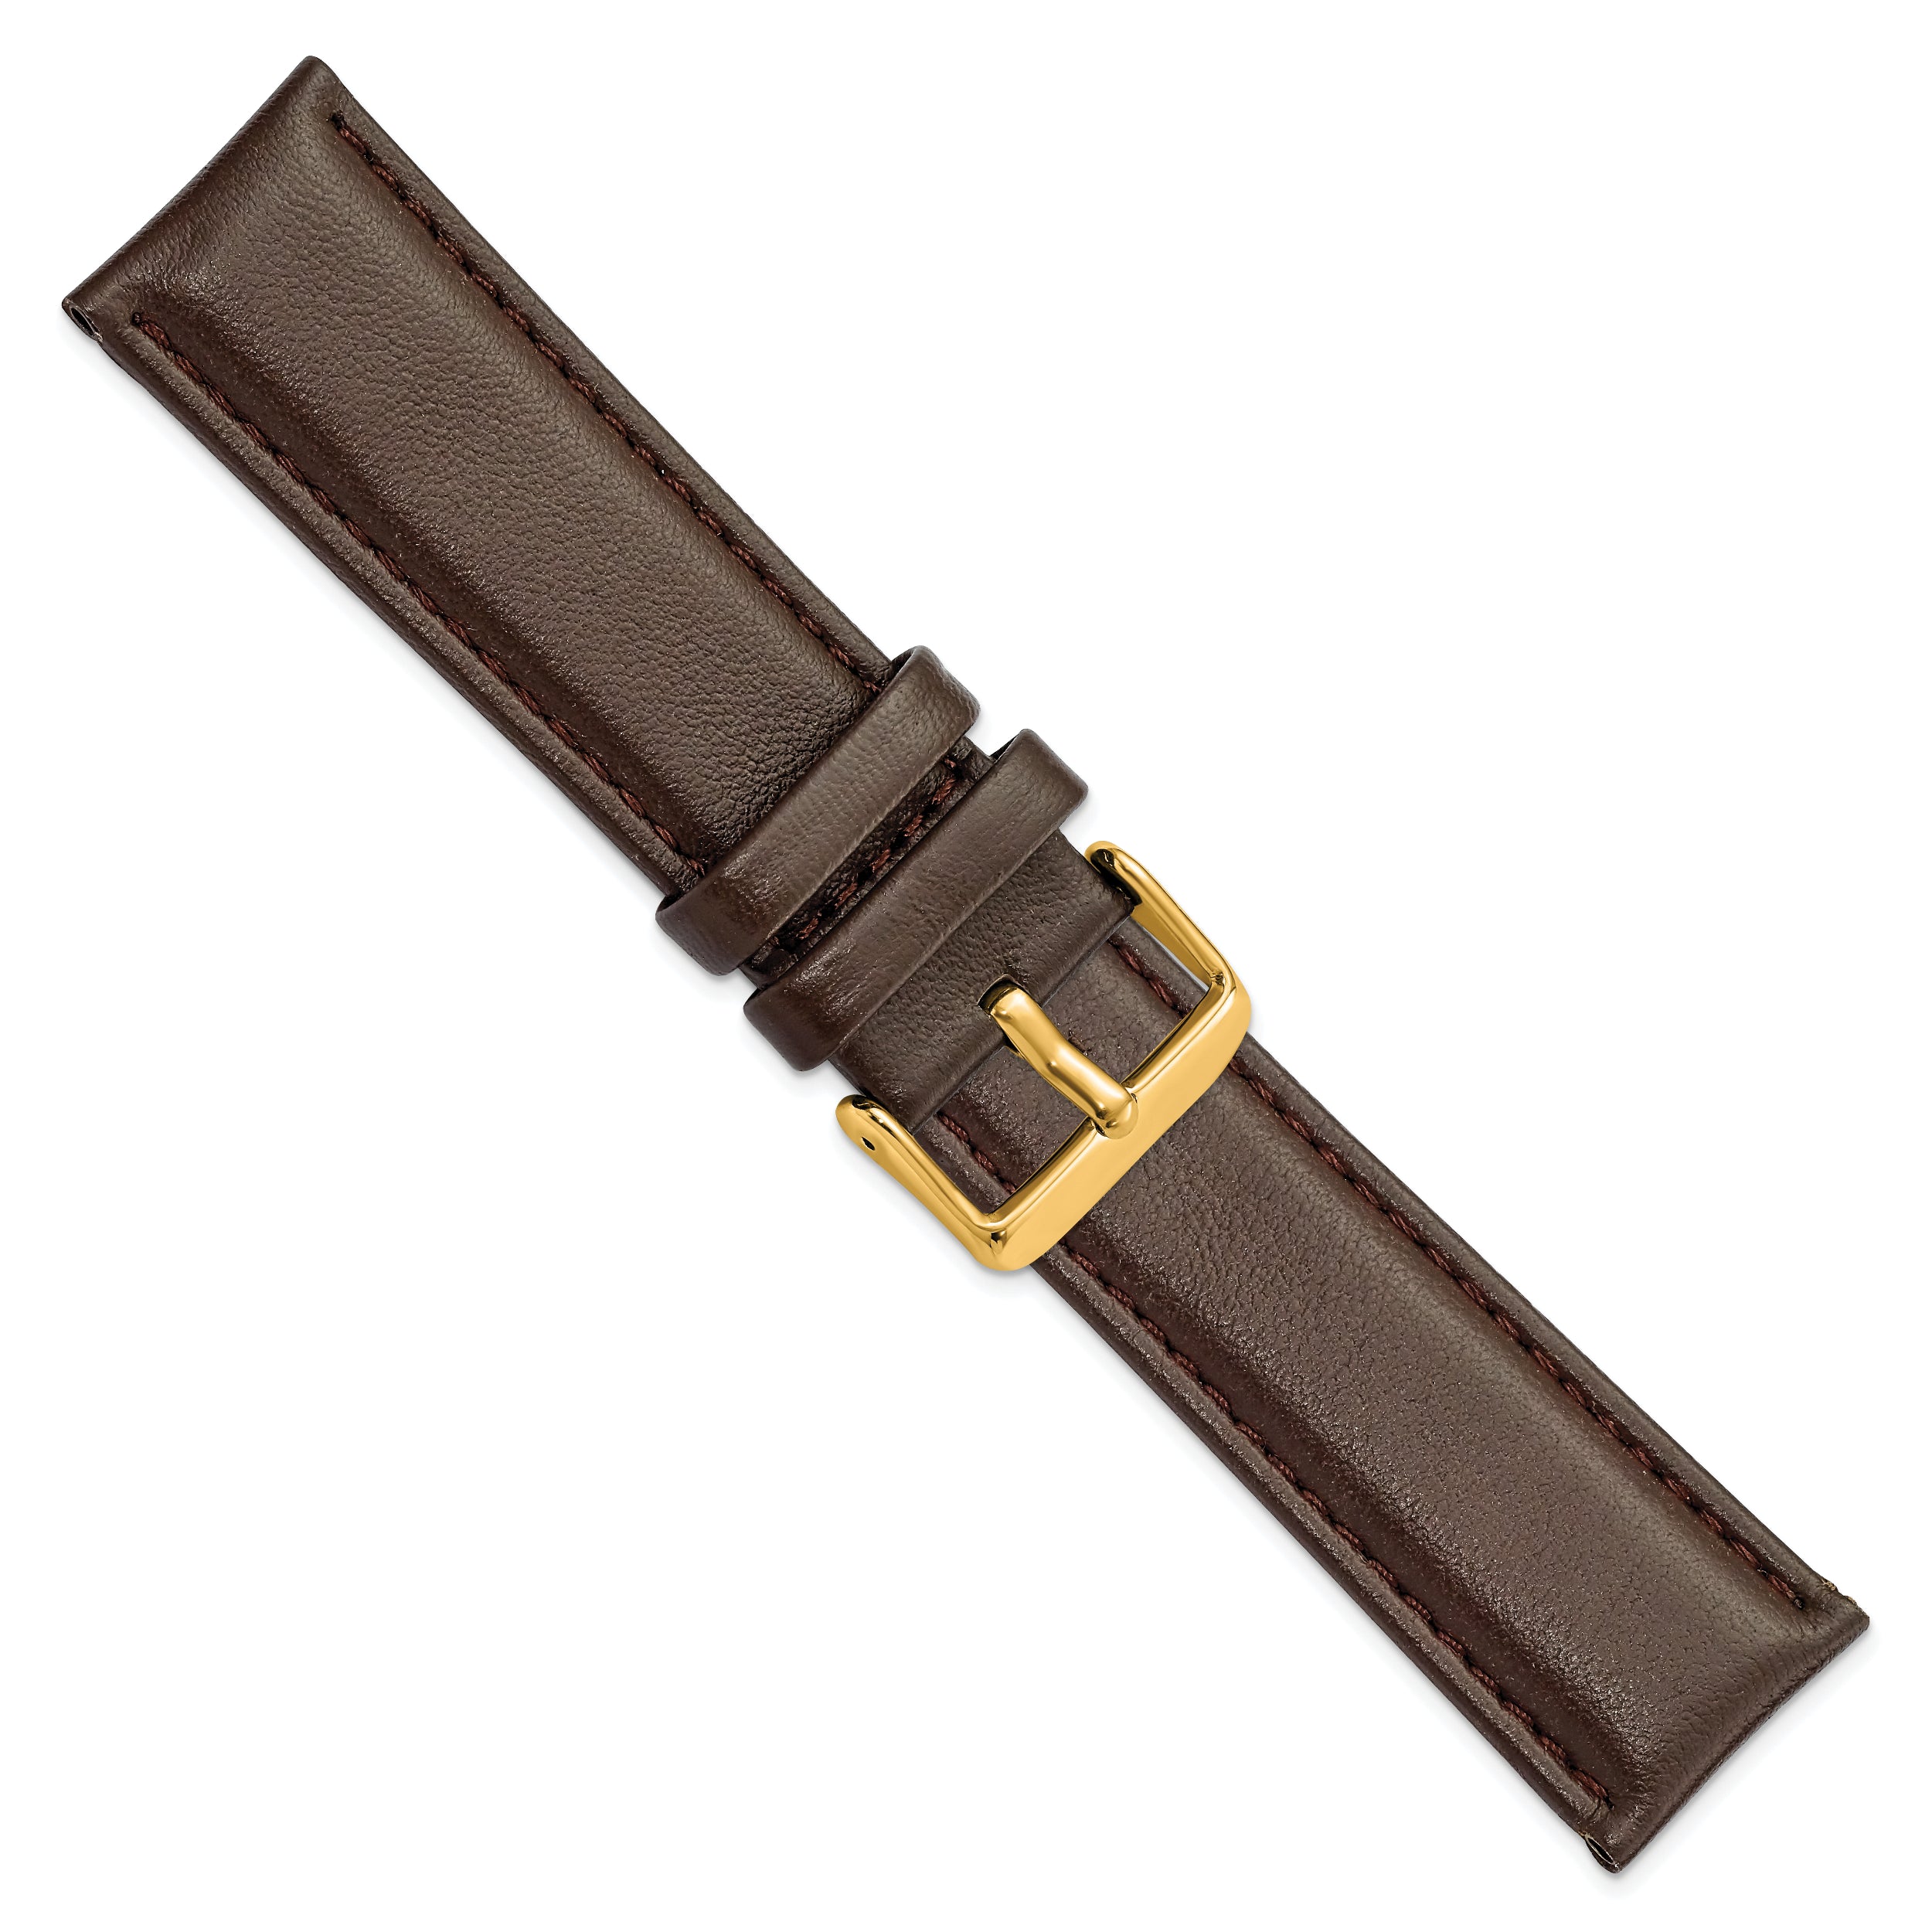 14mm Dark Brown Glove Leather with Gold-tone Panerai Style Buckle 6.75 inch Watch Band